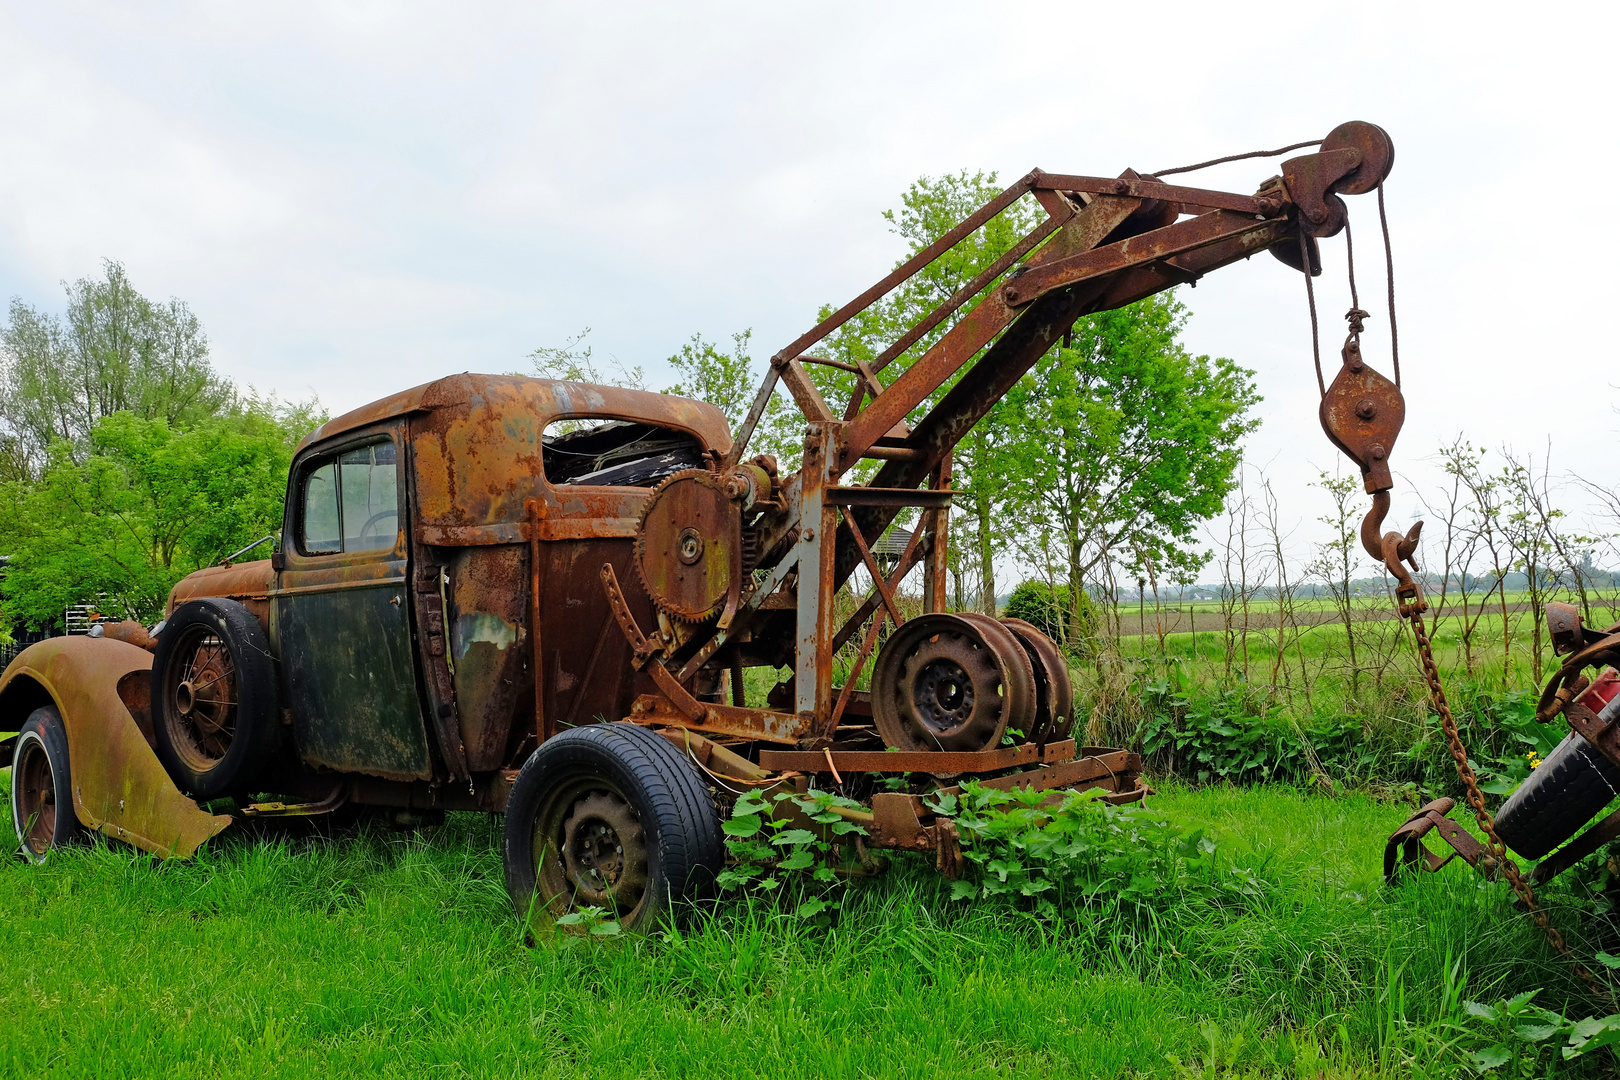 Buick recovery vehicle